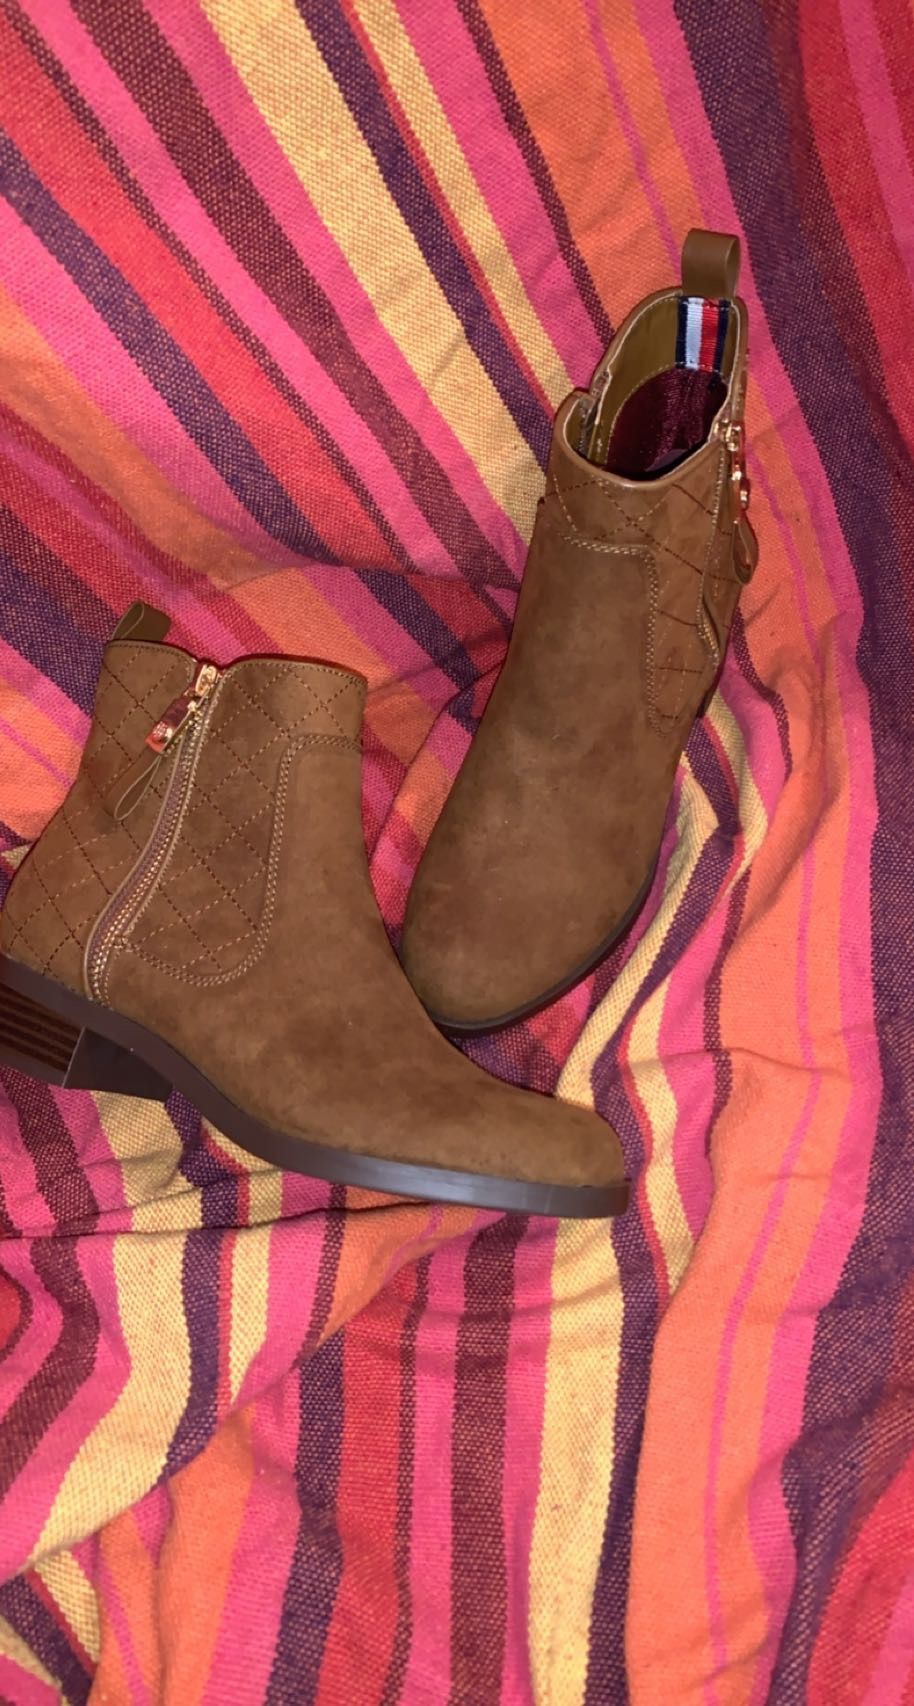 Never Used New Tommy Booties 